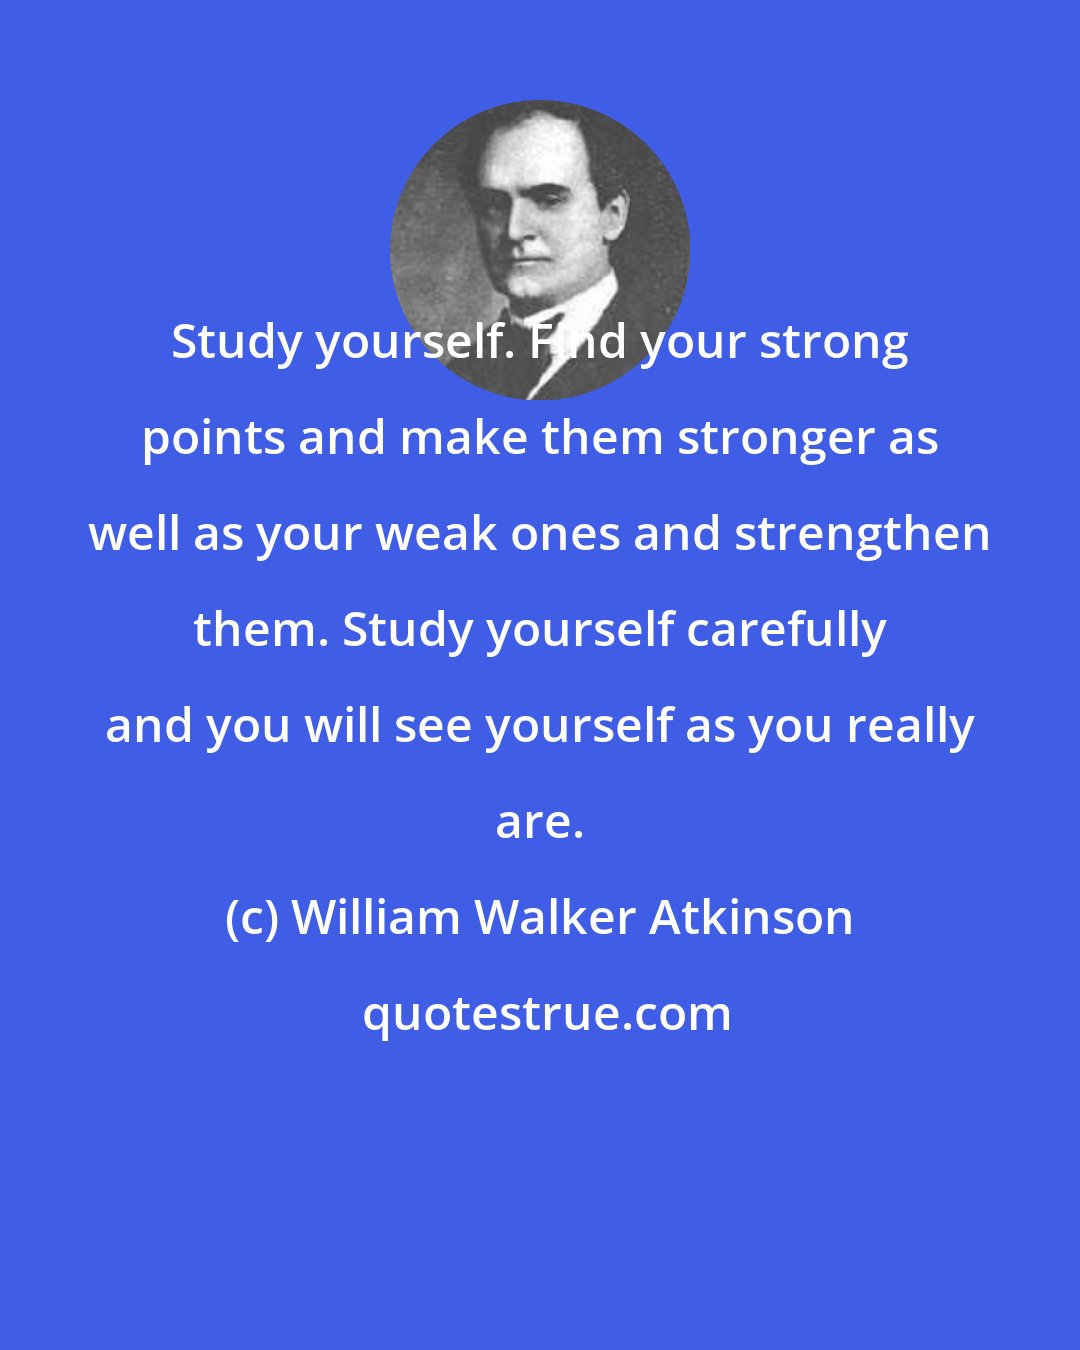 William Walker Atkinson: Study yourself. Find your strong points and make them stronger as well as your weak ones and strengthen them. Study yourself carefully and you will see yourself as you really are.